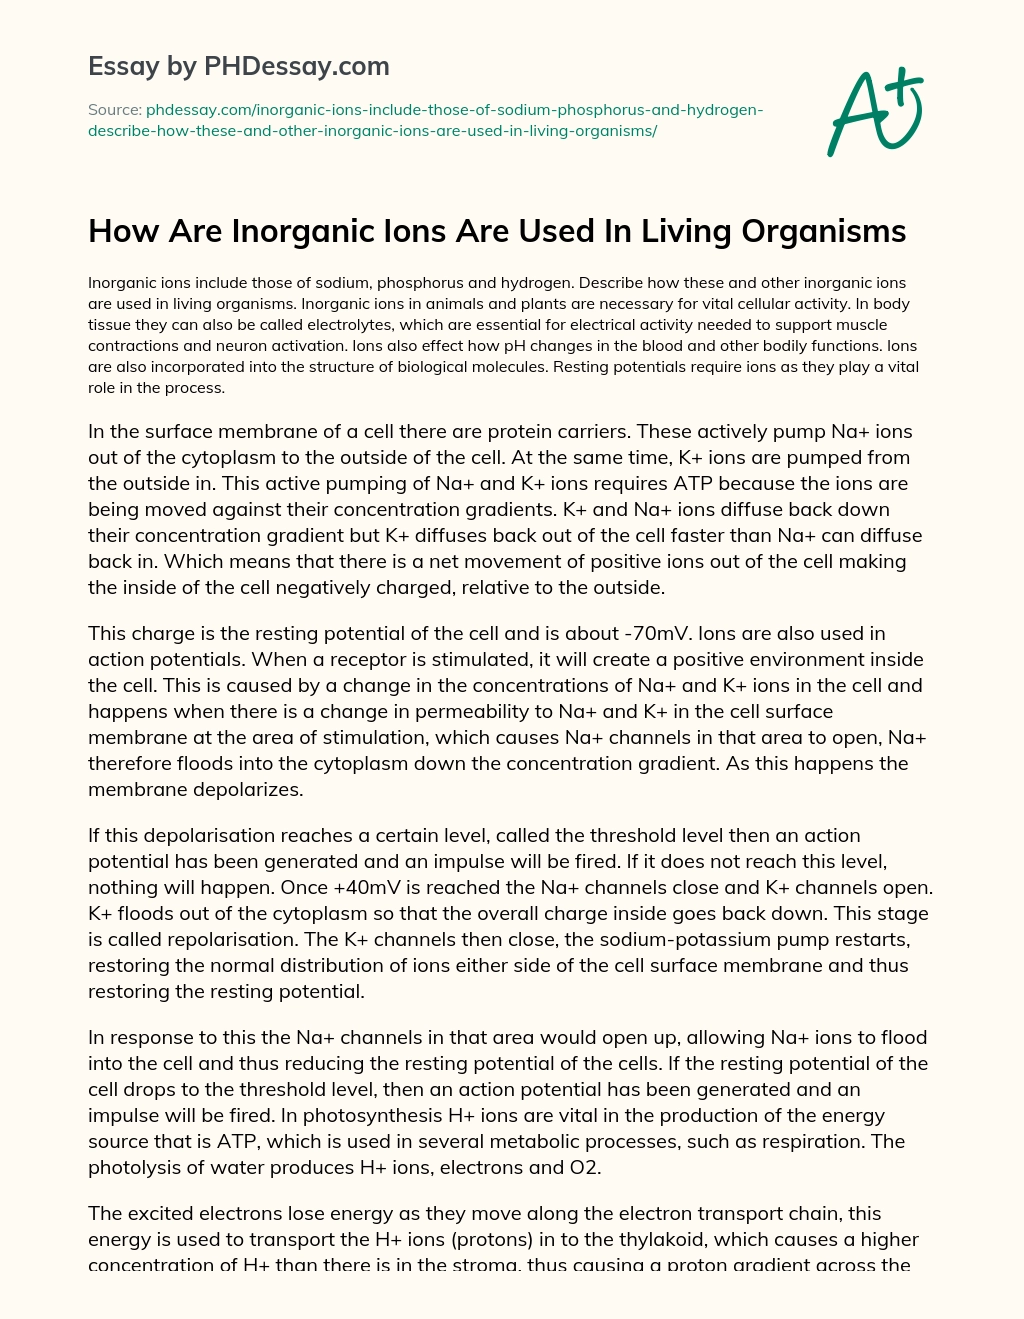 How Are Inorganic Ions Are Used In Living Organisms essay